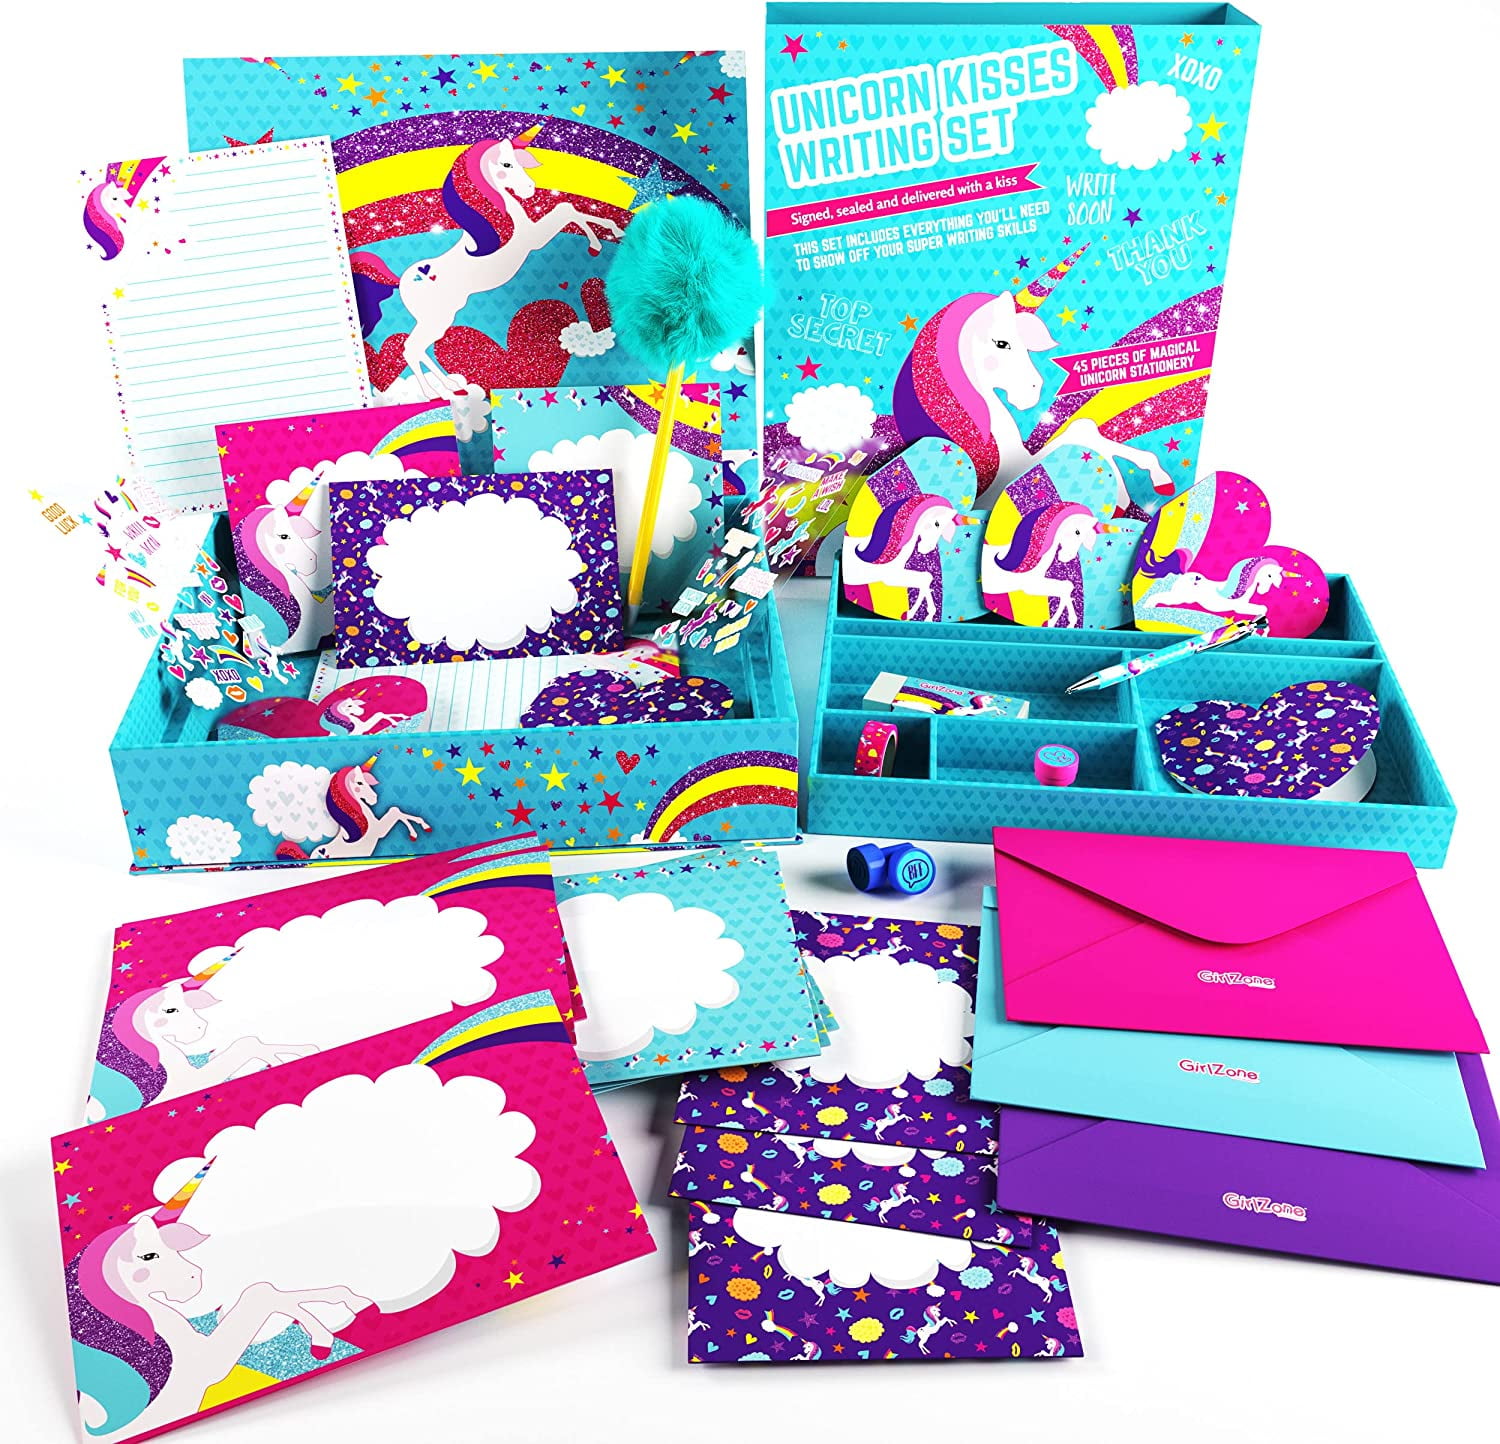 GirlZone Unicorn Letter Writing Set For Girls, 45 Piece Stationery Set,  Great Birthday Gift for Girls of All Ages 